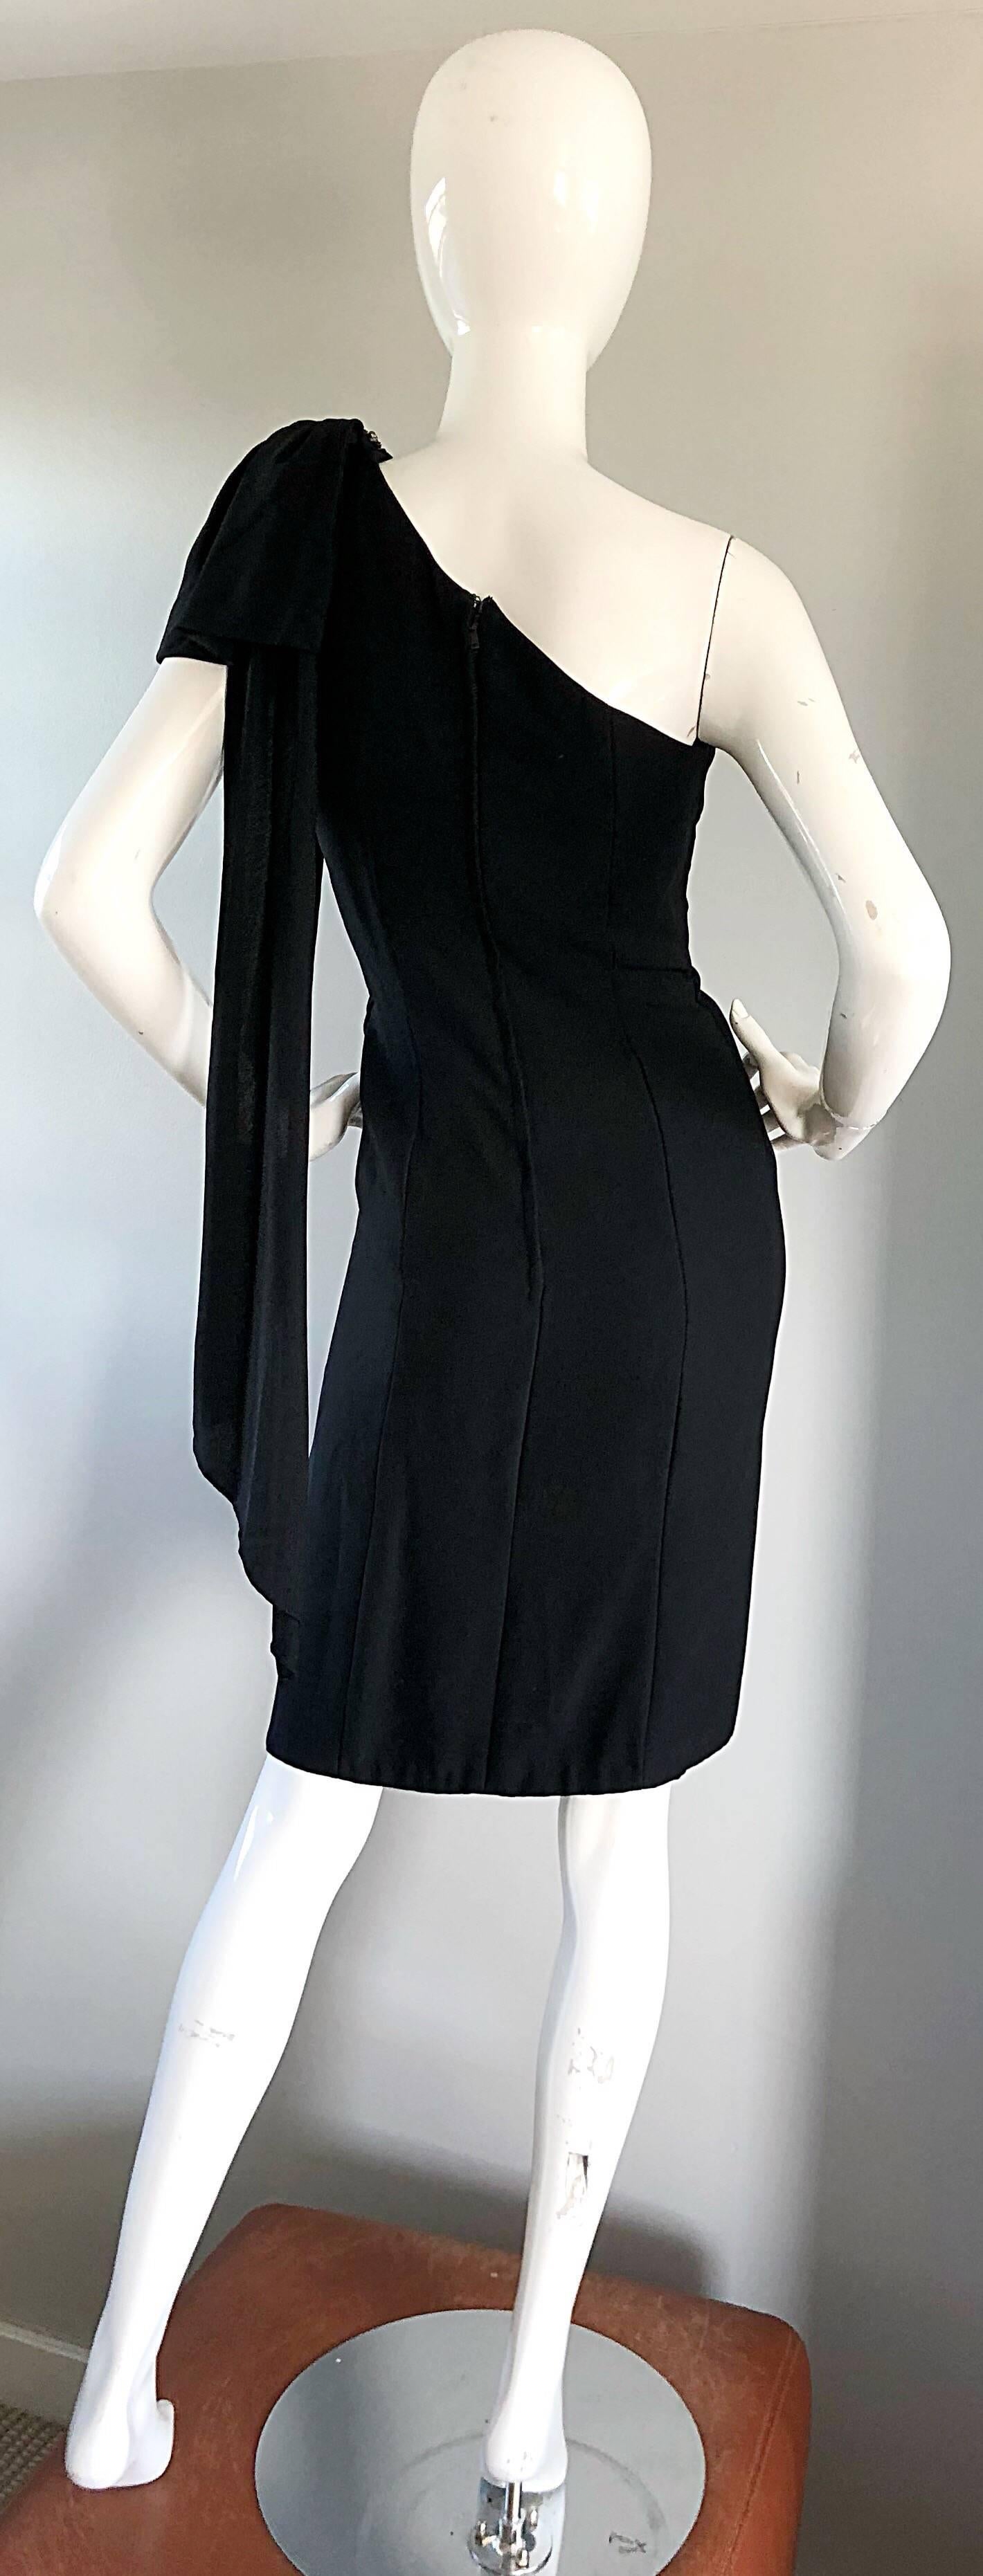 1950s Anita Modes Black Demi Couture One Shoulder Rhinestone 50s Wiggle Dress In Excellent Condition For Sale In San Diego, CA